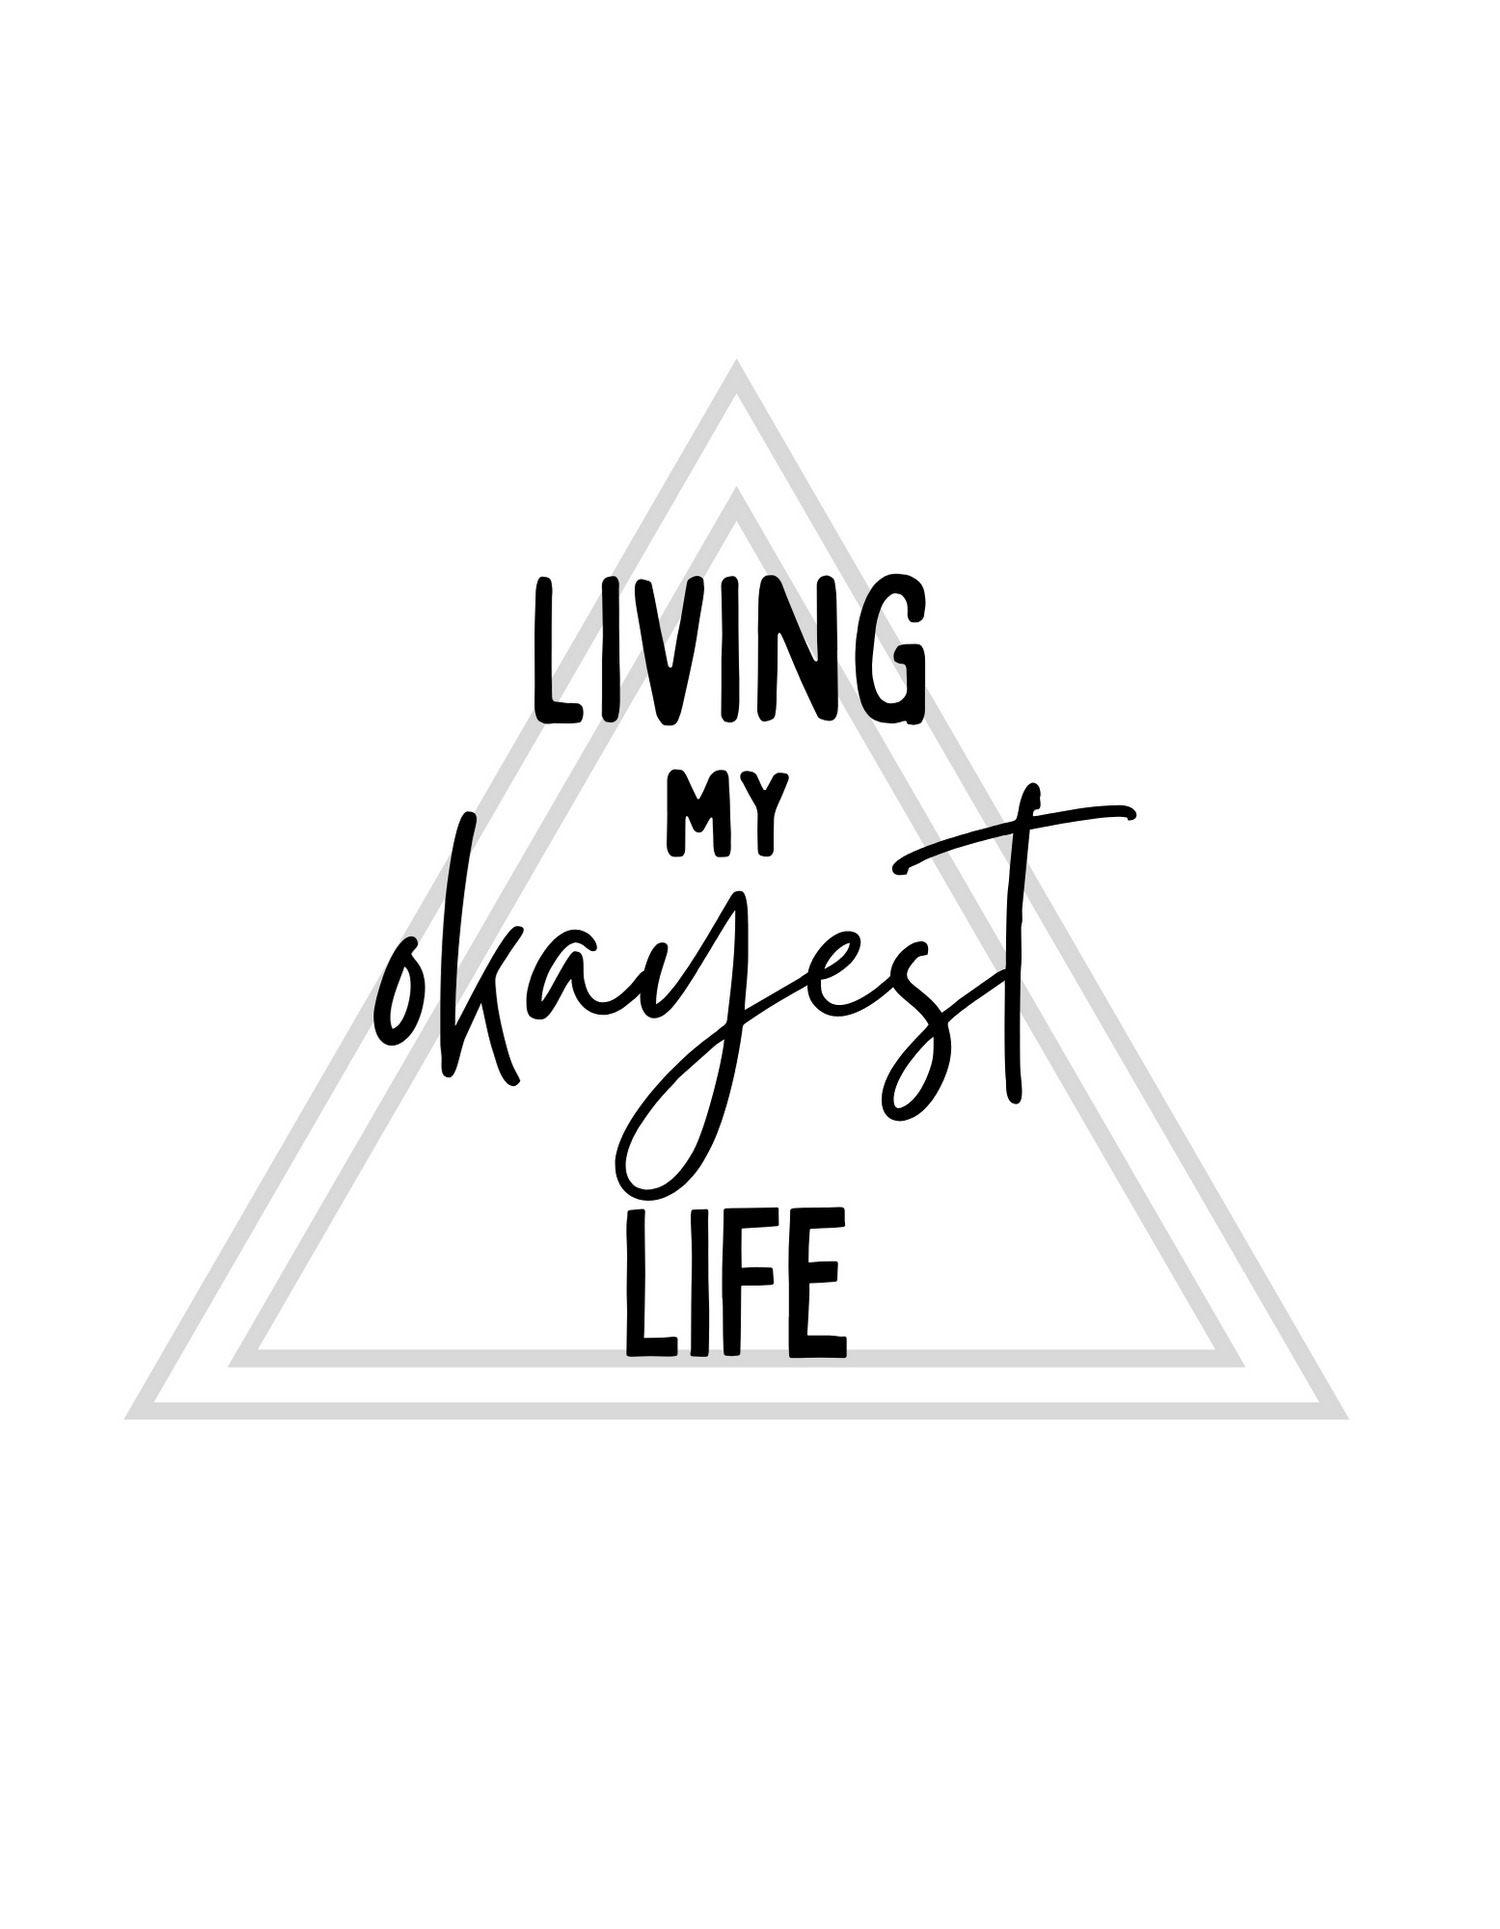 Living my okayest life text in a double triangle design